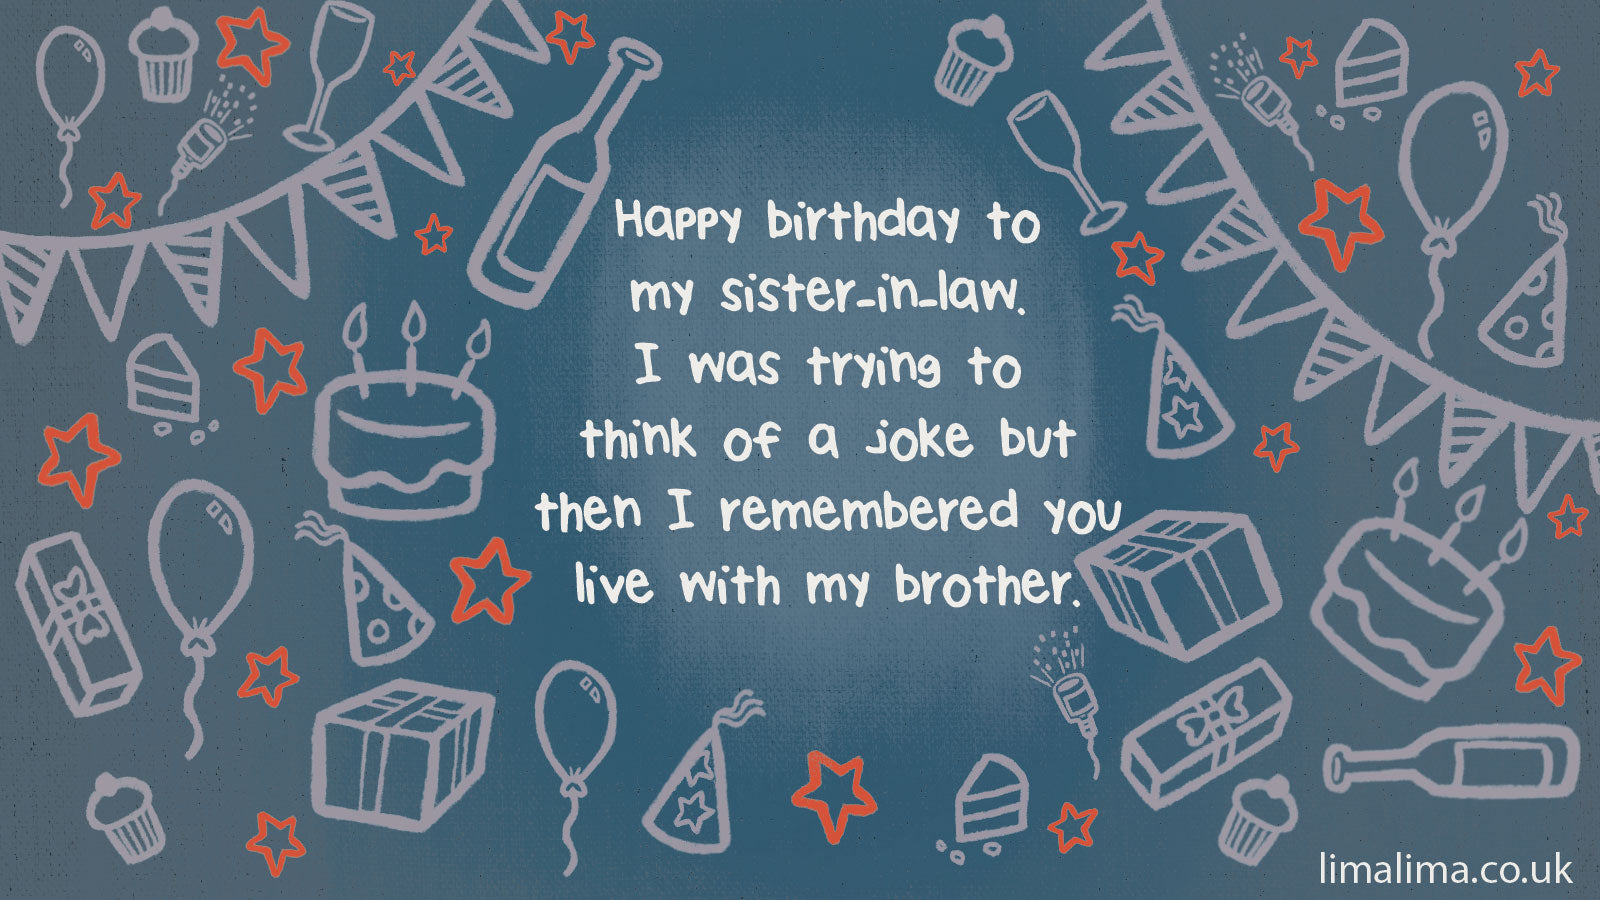 birthday wishes for sister in law quotes